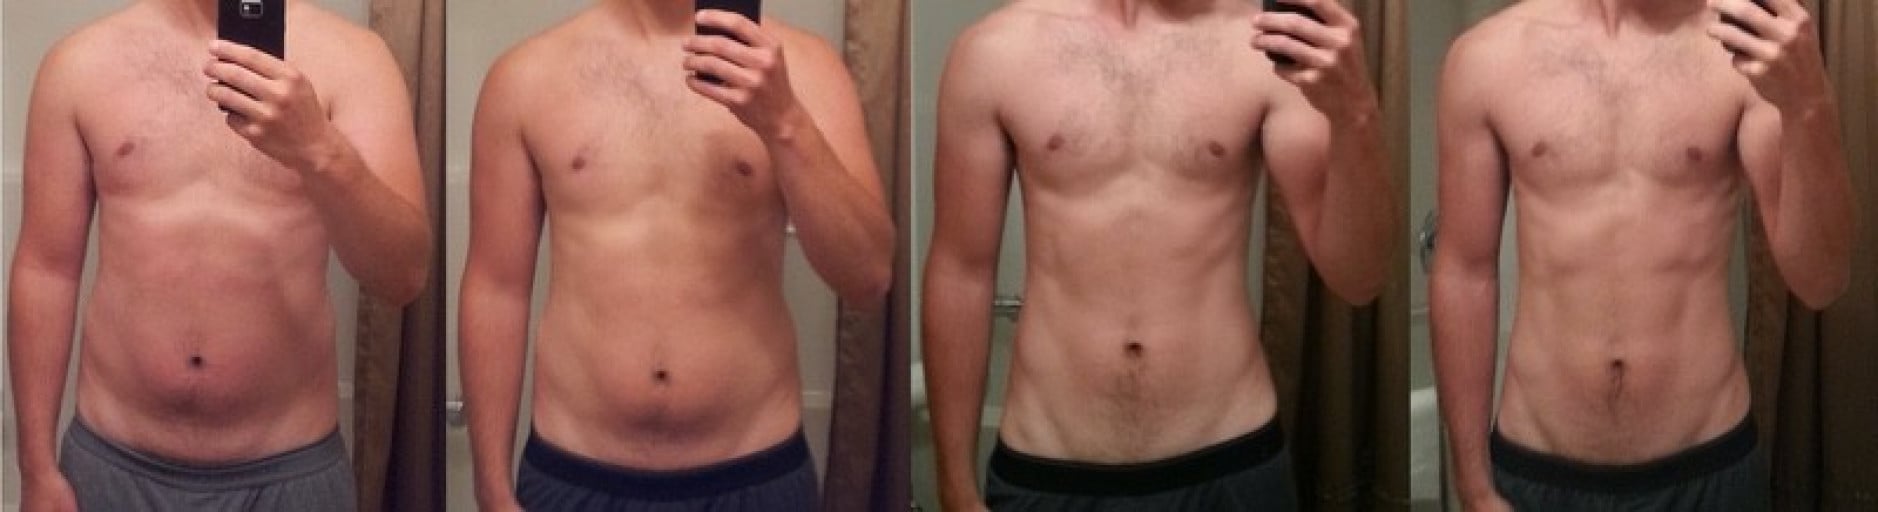 Achieving Sustainable Weight Loss: One Man's Journey to a Stronger, Healthier Body